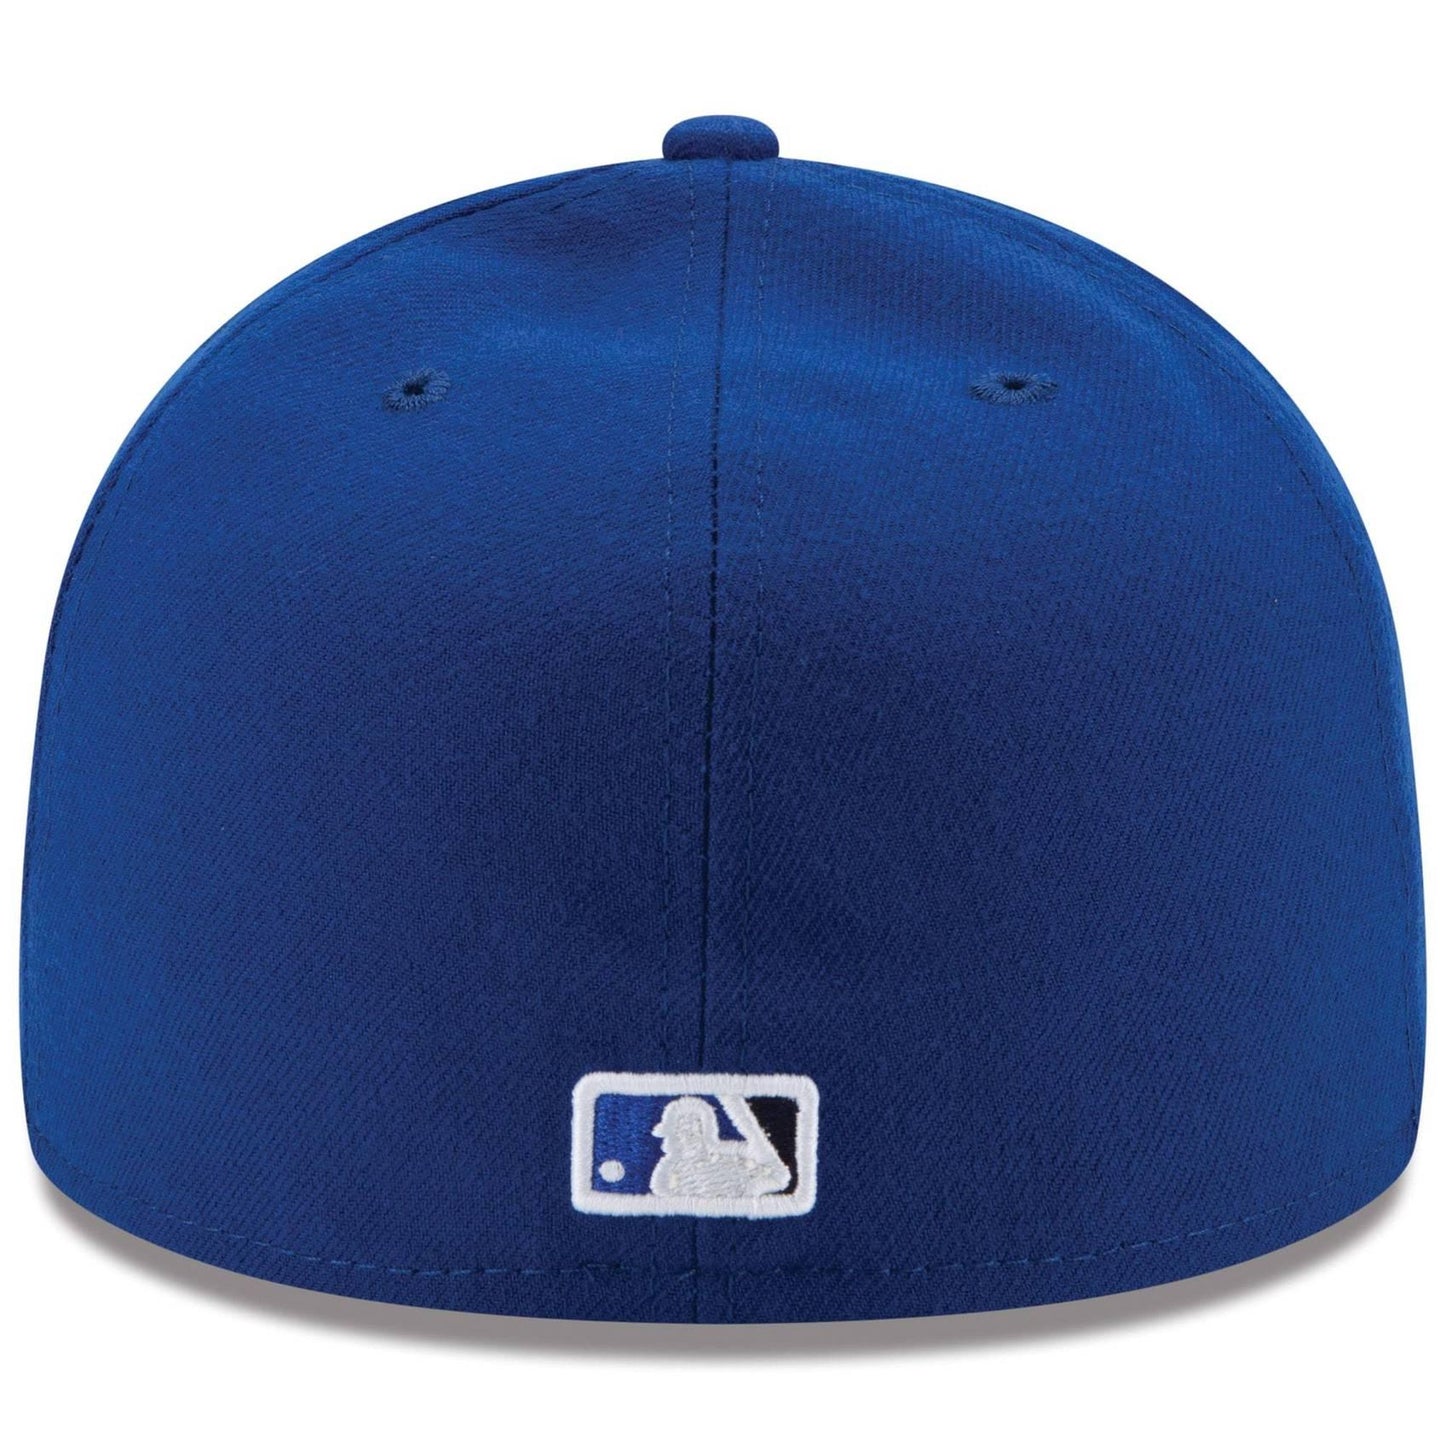 NEW ERA 59FIFTY MLB AUTHENTIC TORONTO BLUE JAYS TEAM FITTED CAP